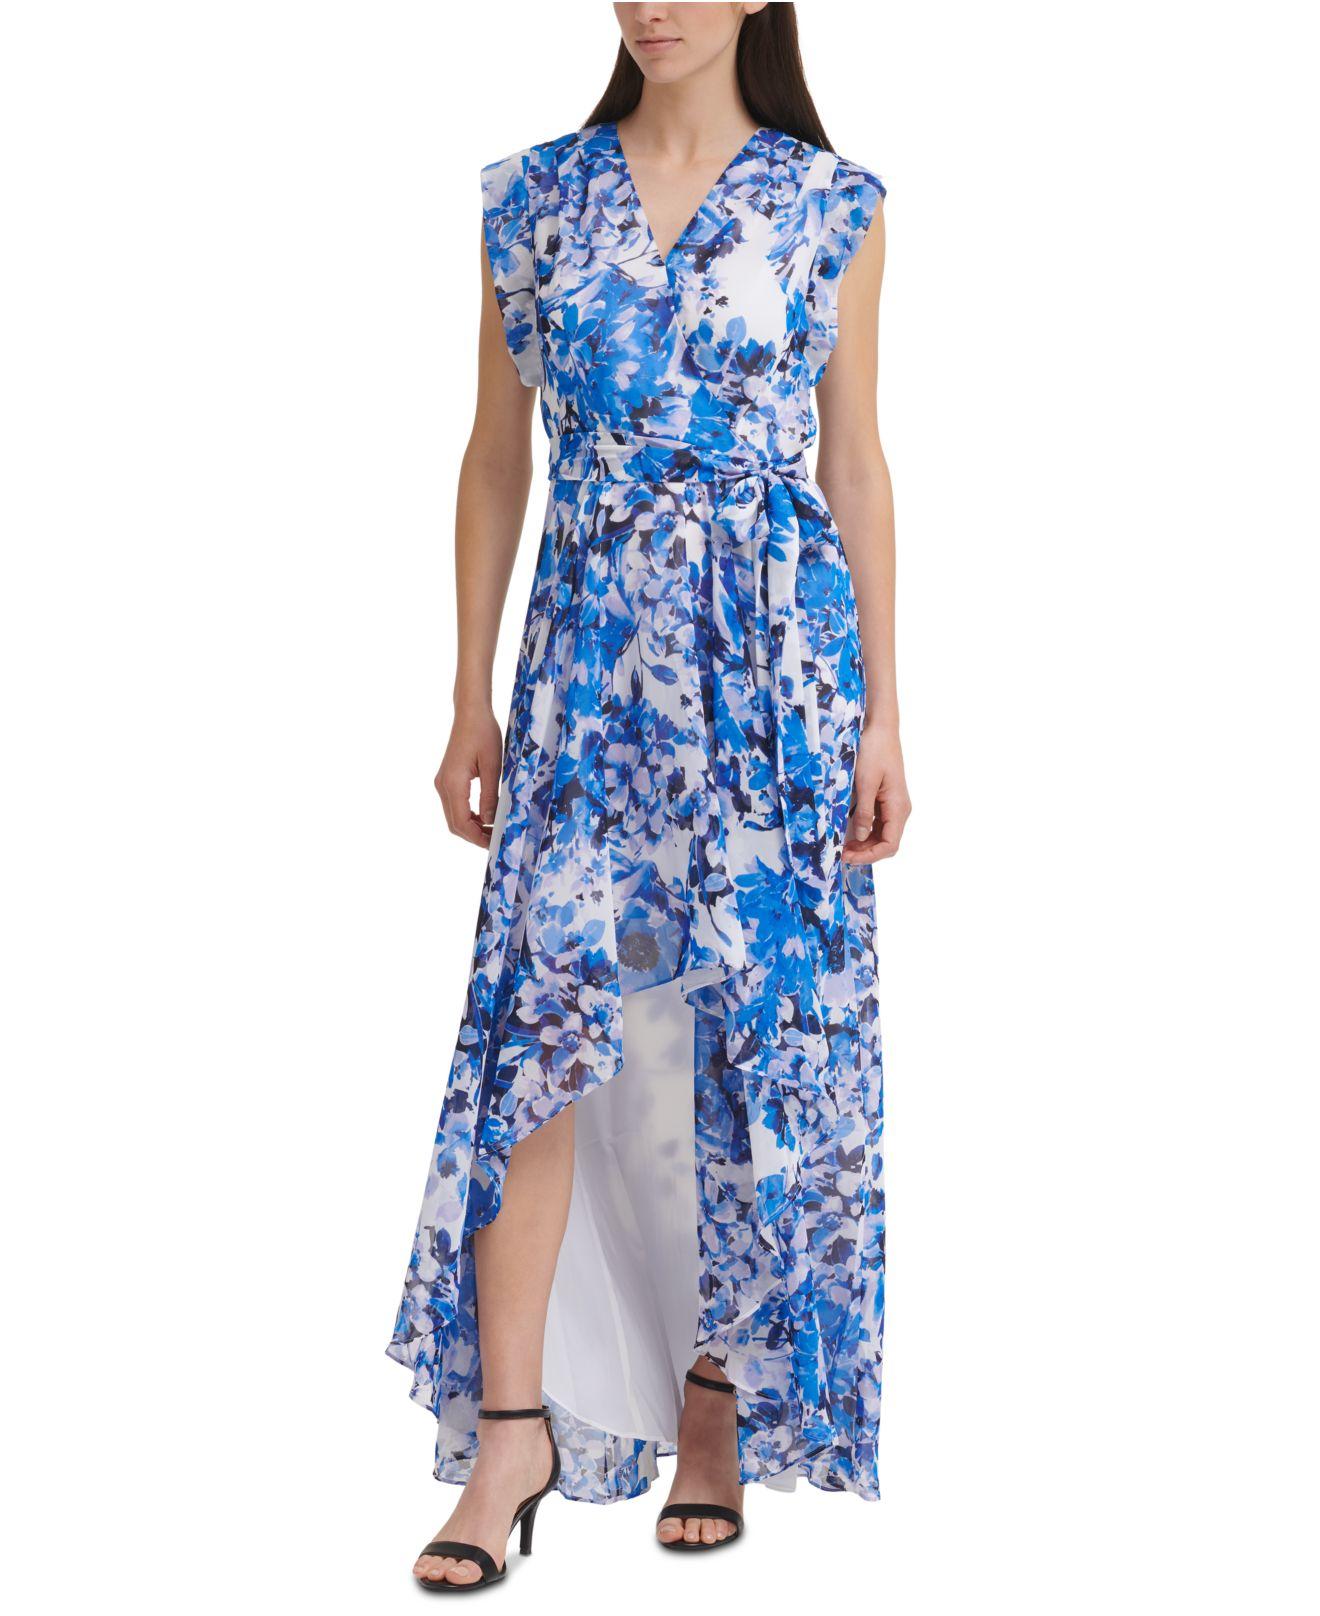 Eliza J Synthetic High-low Faux-wrap Dress in Blue/White Floral (Blue) |  Lyst